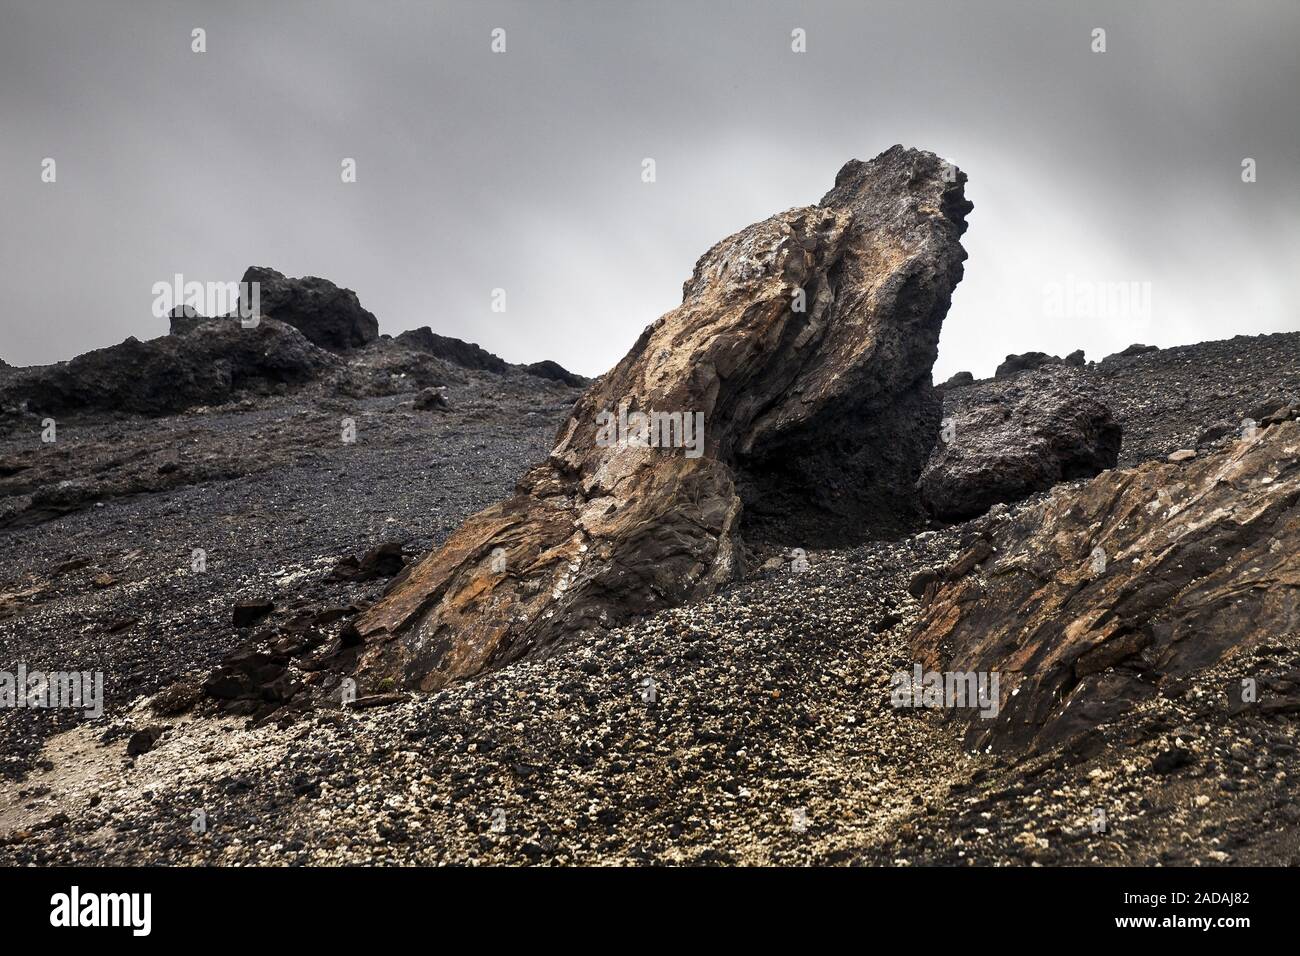 bizarrely shaped landscape with lava rocks and pumice in the dragon valley, Drekagil, Iceland Stock Photo